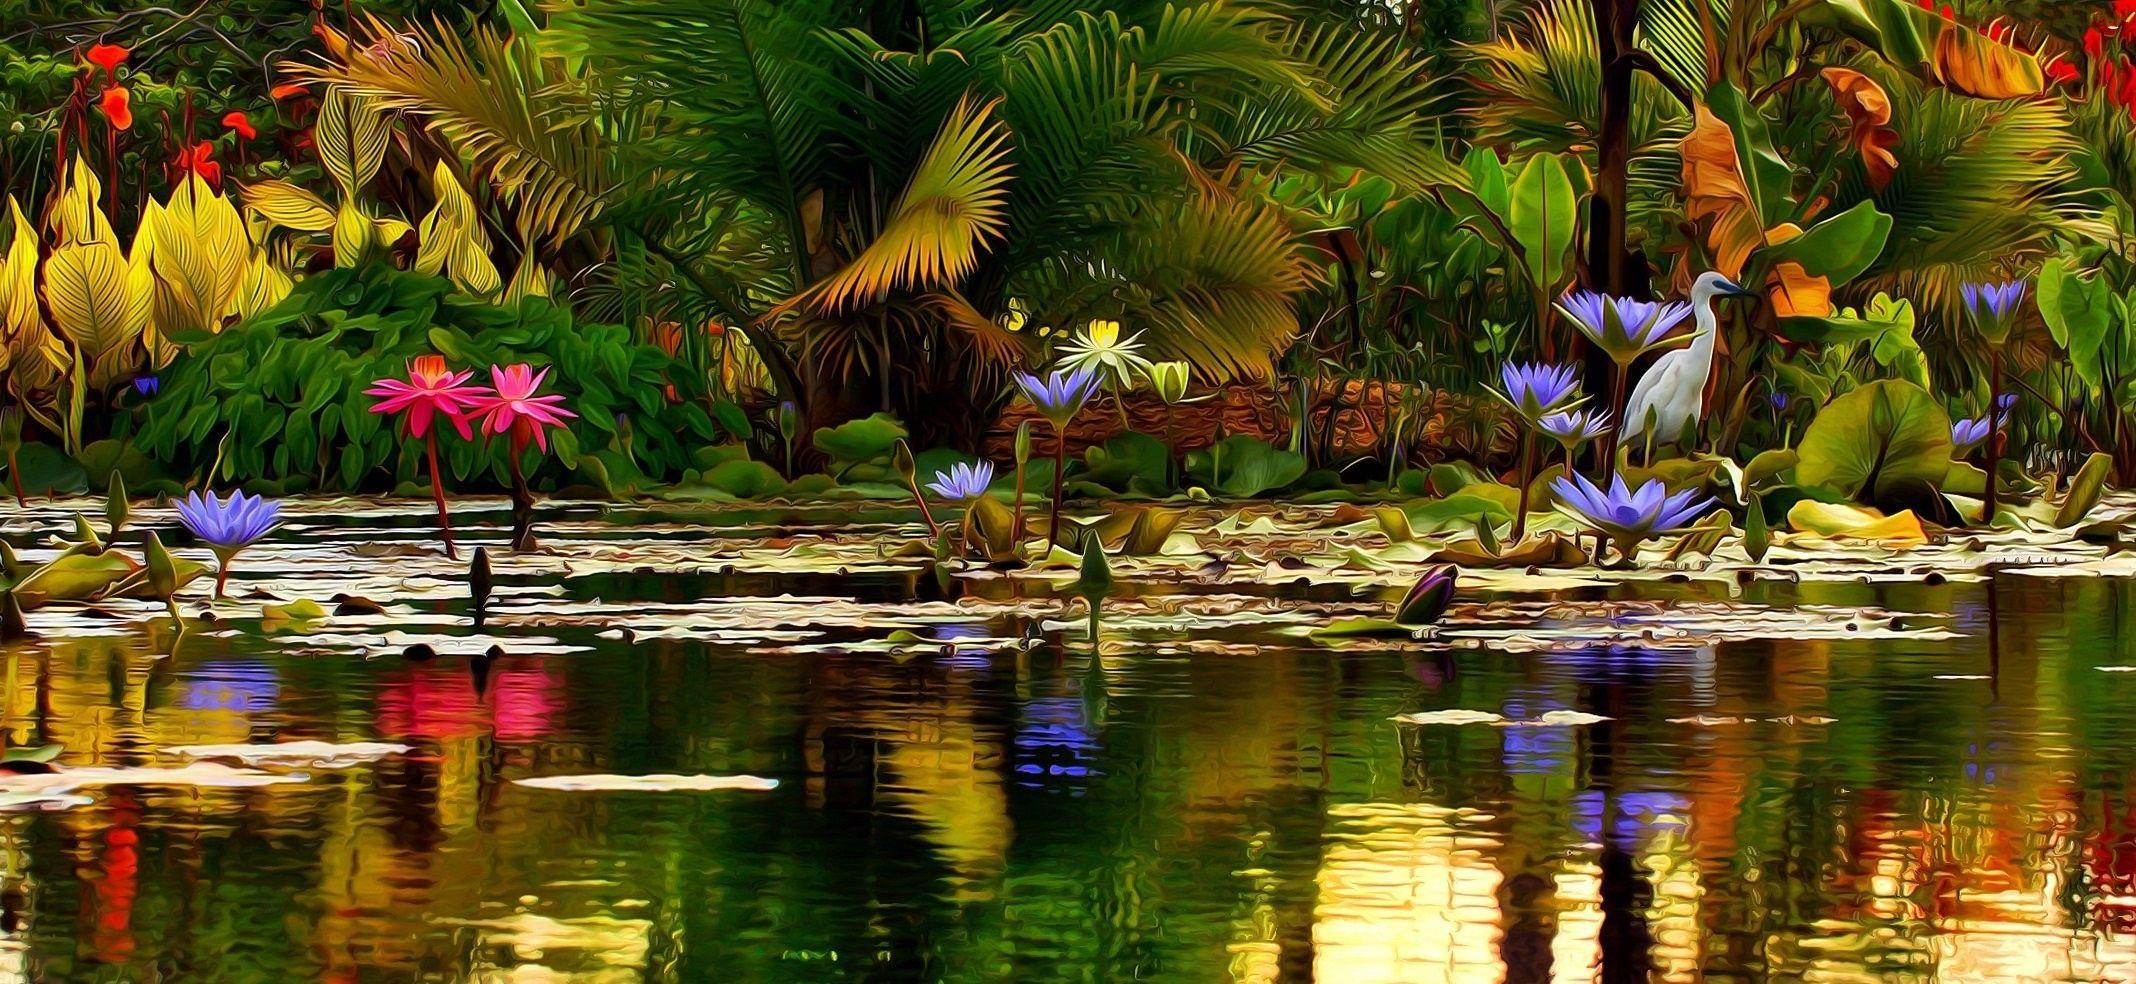 Pond Wallpapers